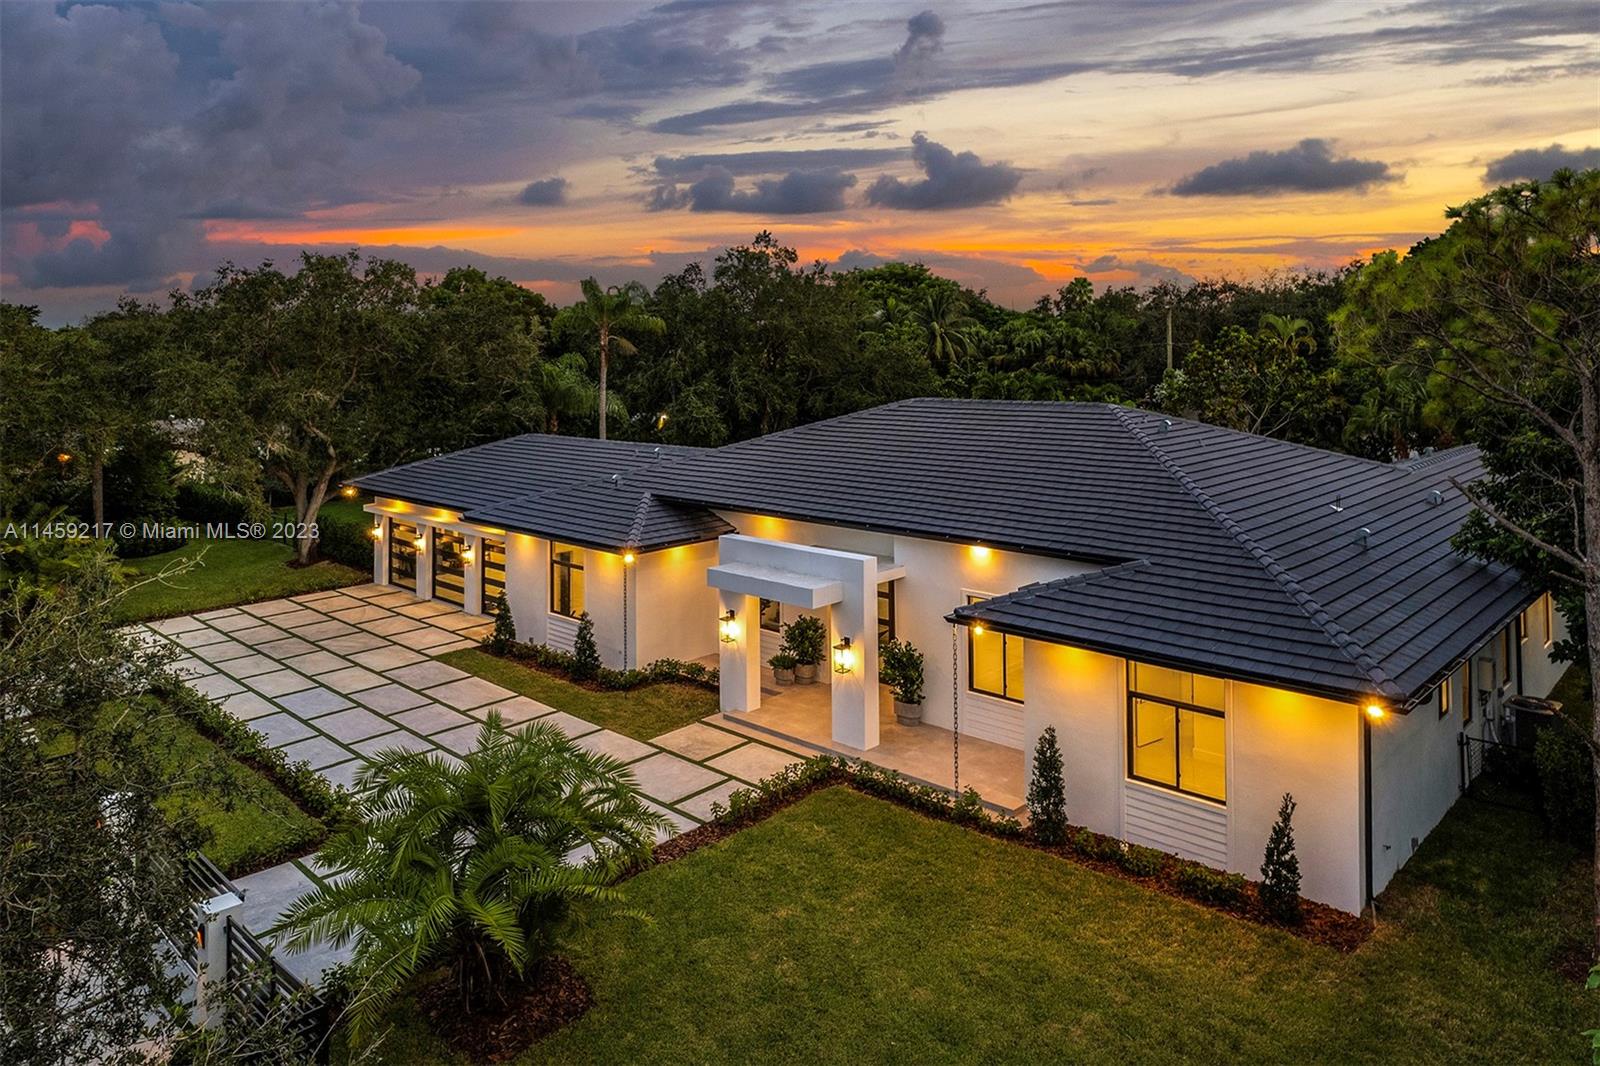 Available for immediately occupancy. Discover the marvel of 2023 architecture in the sought-after Pinecrest. Spanning 6,678 sq. ft. on a 37,897 sq. ft. plot, this grand estate offers 5 bedrooms, 6.5 baths, & a 3-car garage. Dive into spacious living areas, state-of-the-art open kitchen equipped with Sub-Zero & Wolf appliances, & a large pantry. The design ensures fluidity across living, dining, & entertainment spaces, extending to a family-friendly zone with a convenience bar. Every bedroom provides an en-suite bath & walk-in closet. The exquisite primary suite is a haven of luxury, complemented by a lavish bath with dual amenities & a standalone tub. Relish the outdoors with terraces, an outdoor BBQ, & a heated L-shaped pool. Top-tier schools in proximity. Shopping & expressways nearby.